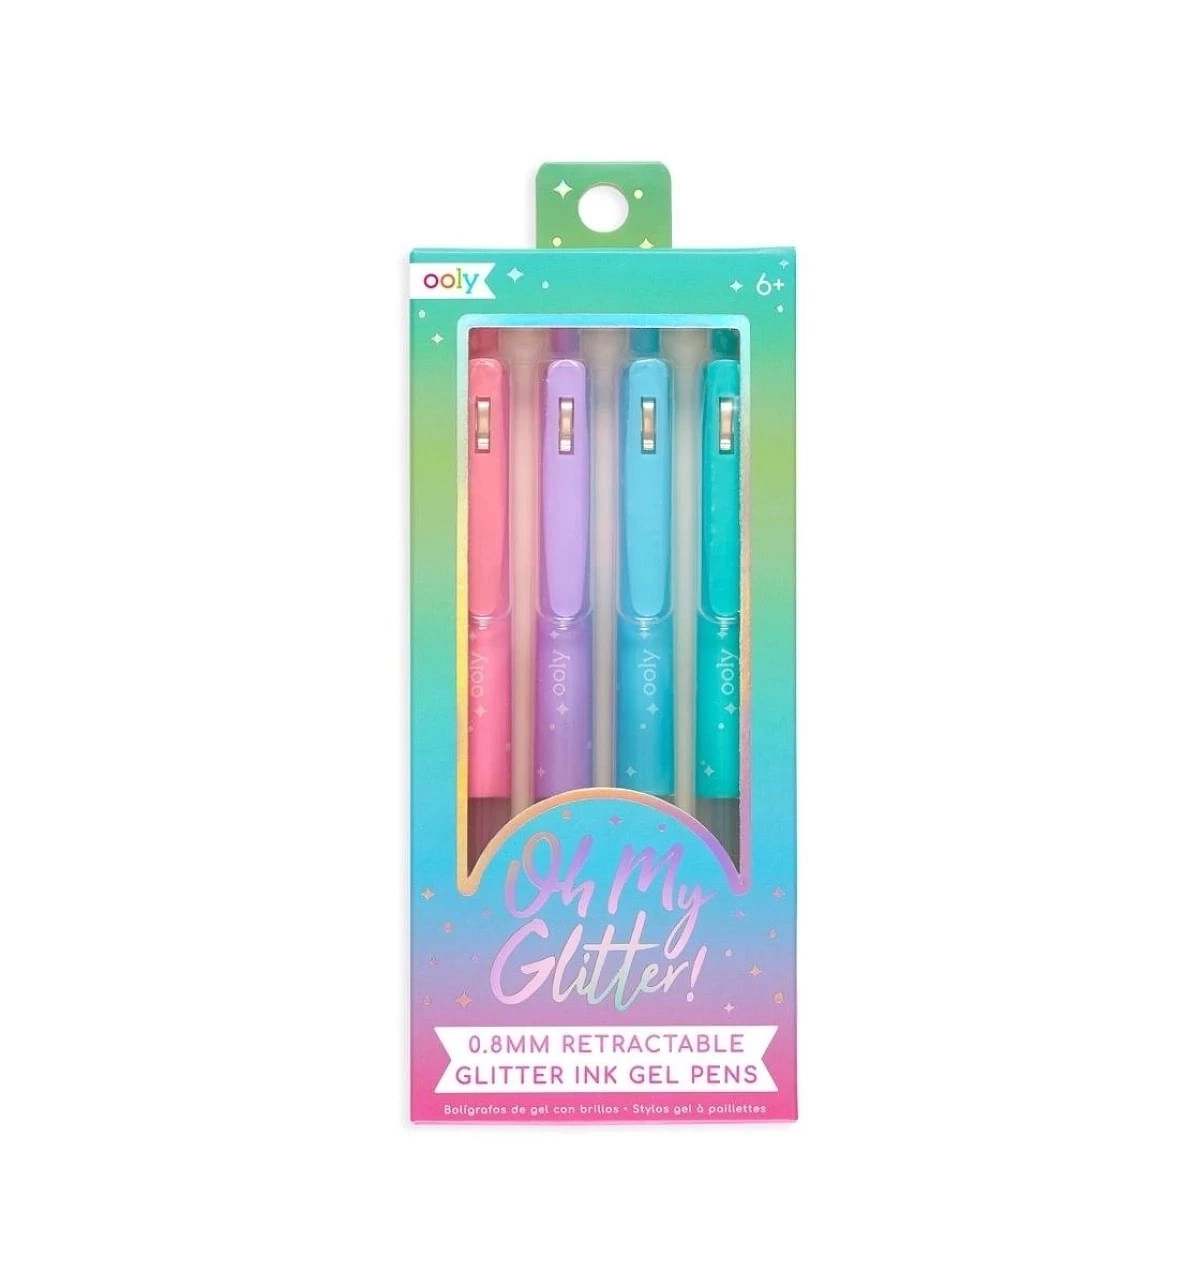 OOLY Oh My Glitter, Gel Pens For Kids & Students, Set of 4, Multicolour 6Y+